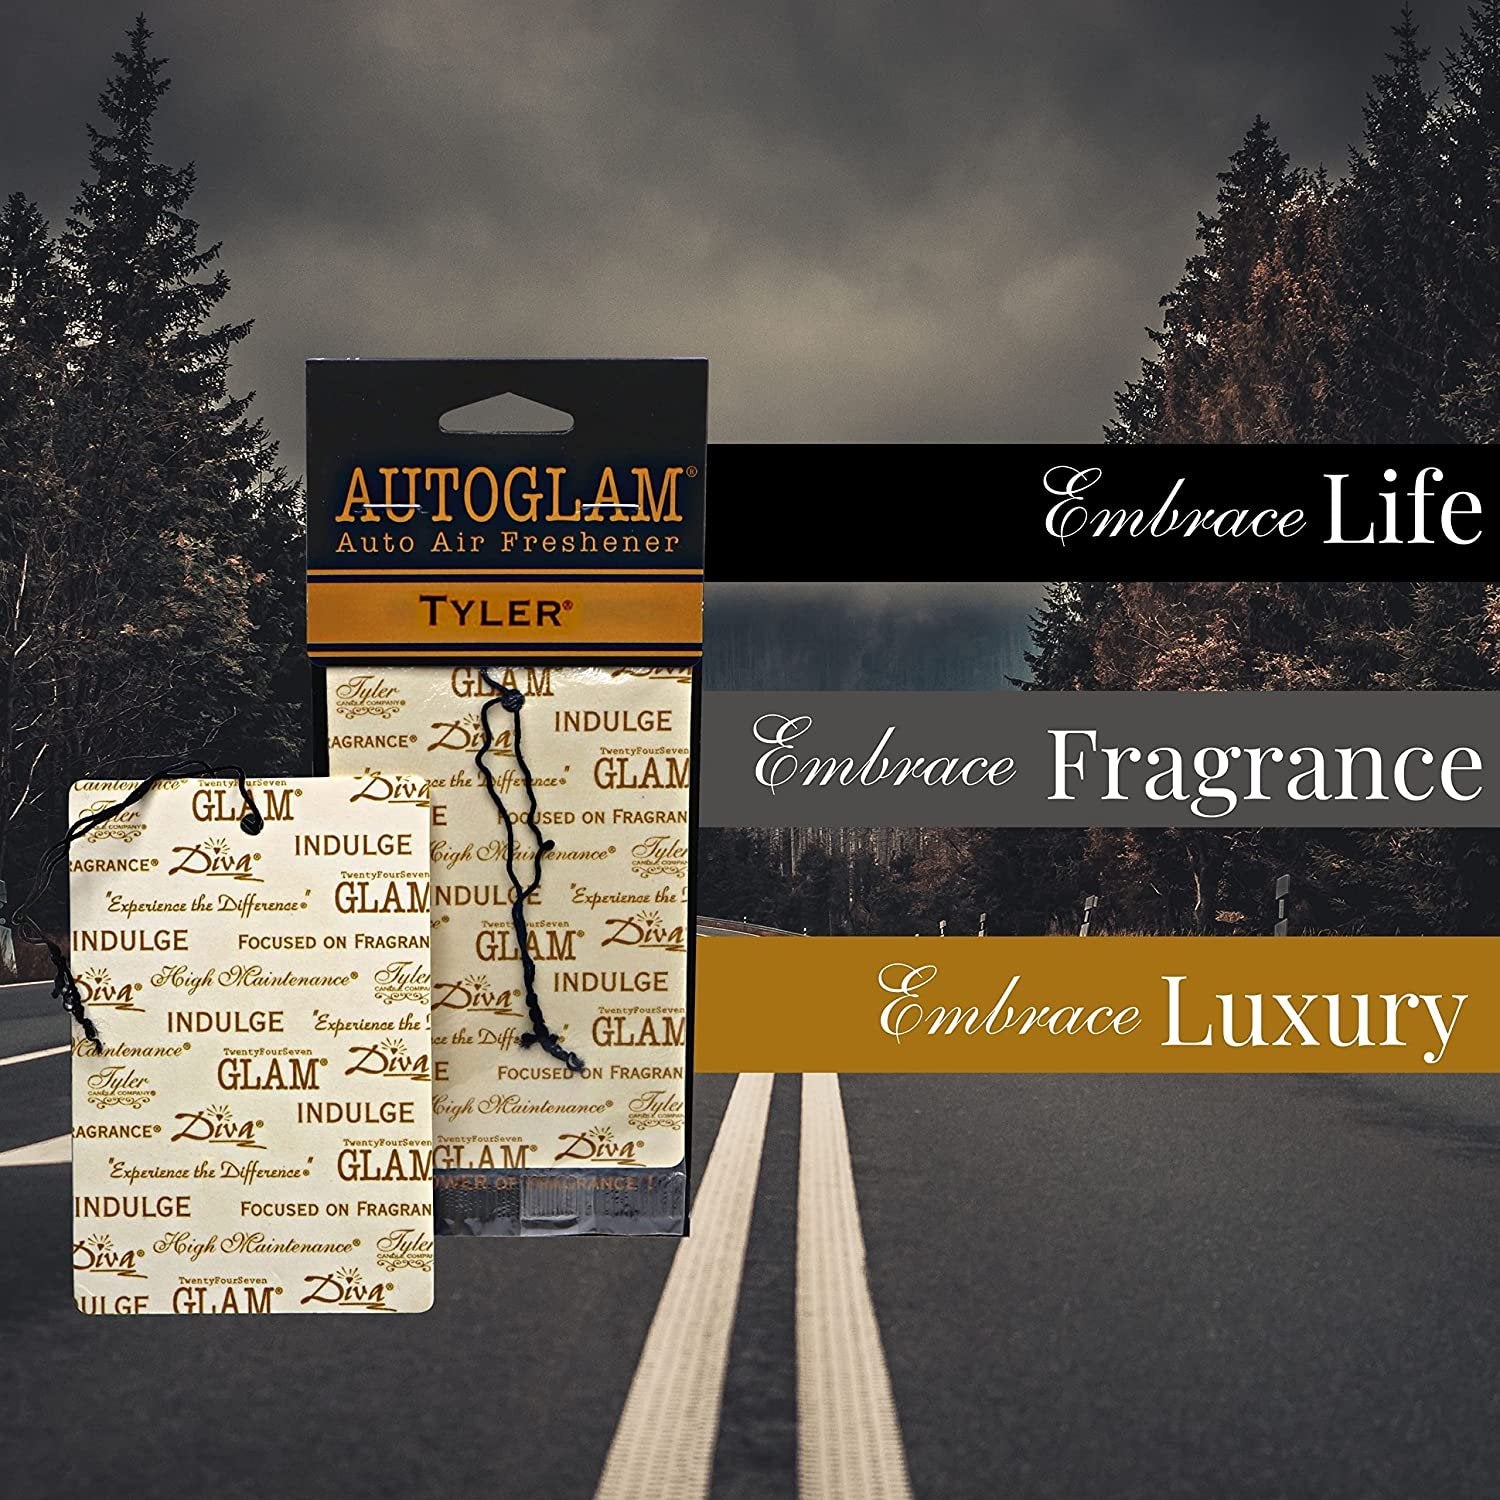 Tyler Candle Company AutoGlam Car Air Fresheners - Tyler Scent Car Fresheners | Car Odor Eliminator Air Refresher | Car Accessories - Pack of 3 w Worldwide Nutrition Multi Purpose Key Chain